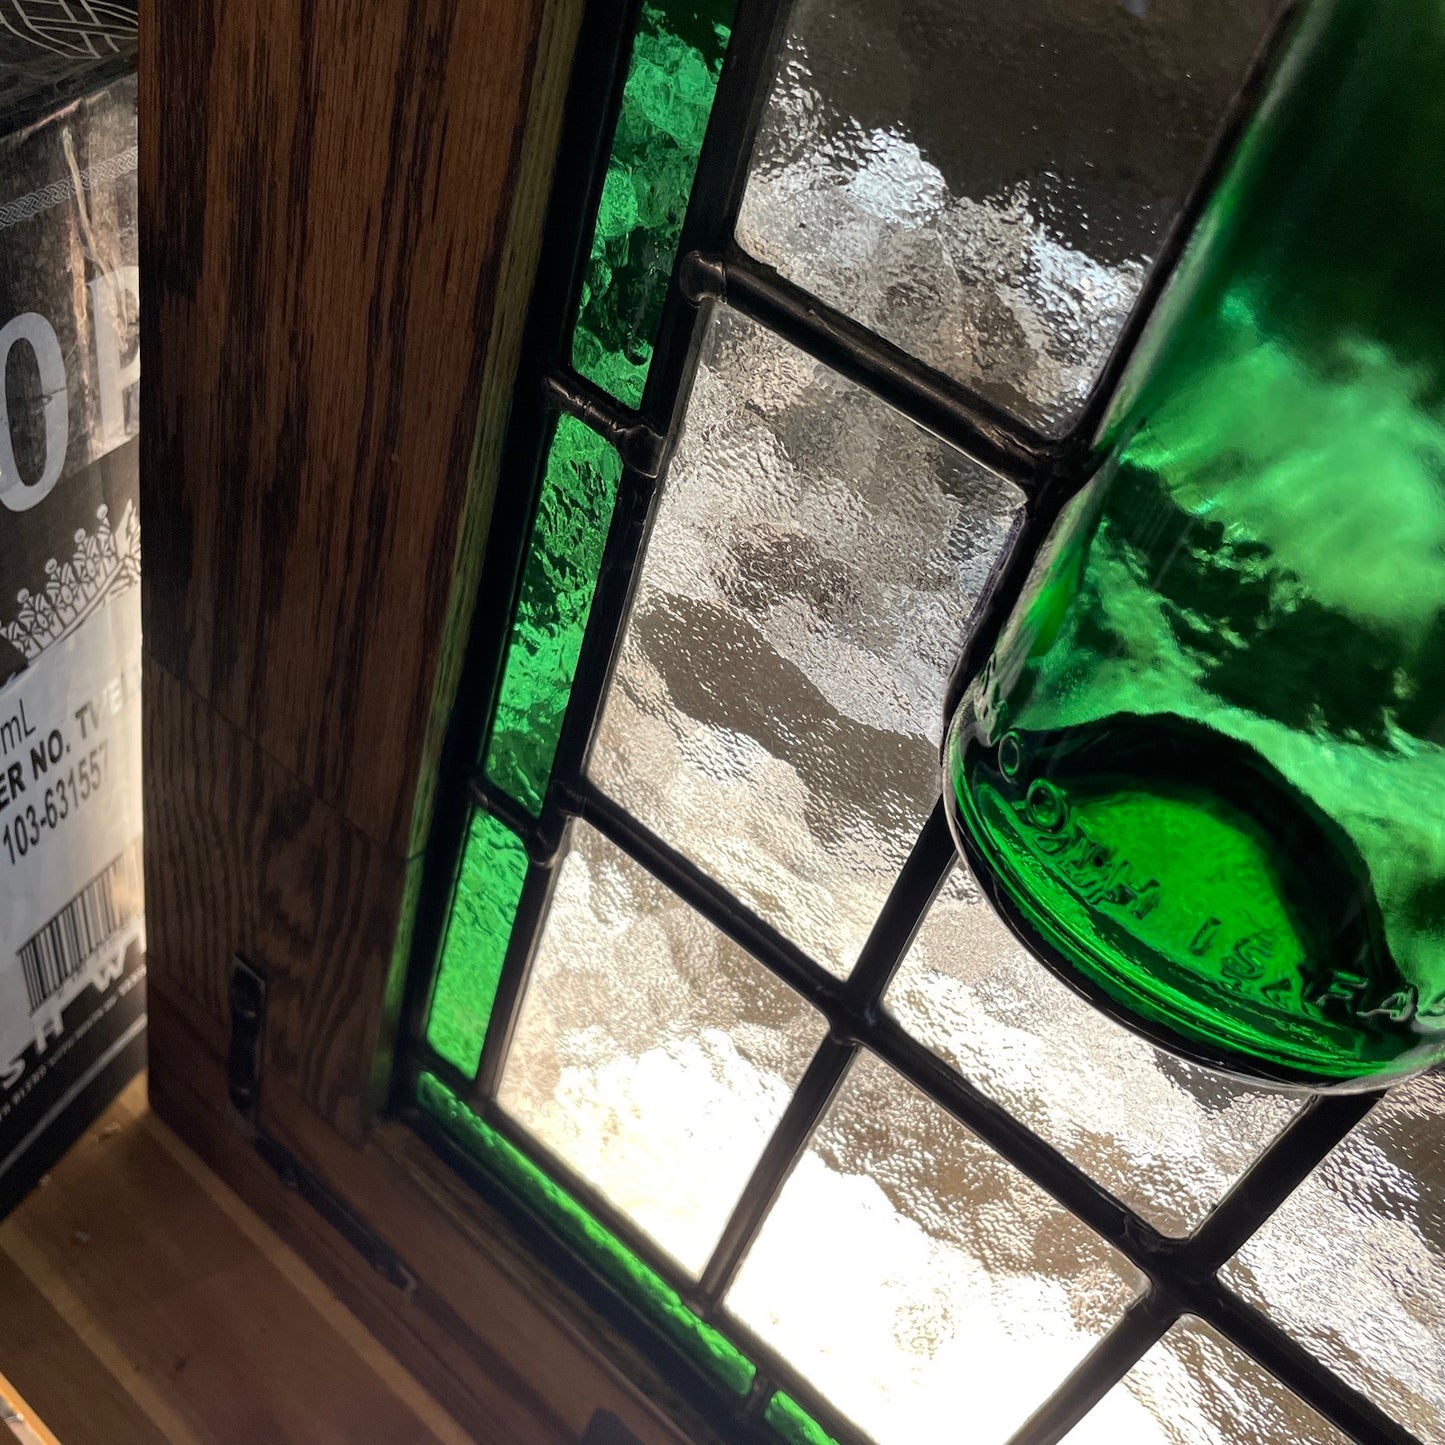 Half Bottle Stained Glass Panel - Whiskey, Wine, Beer of Your Choice.